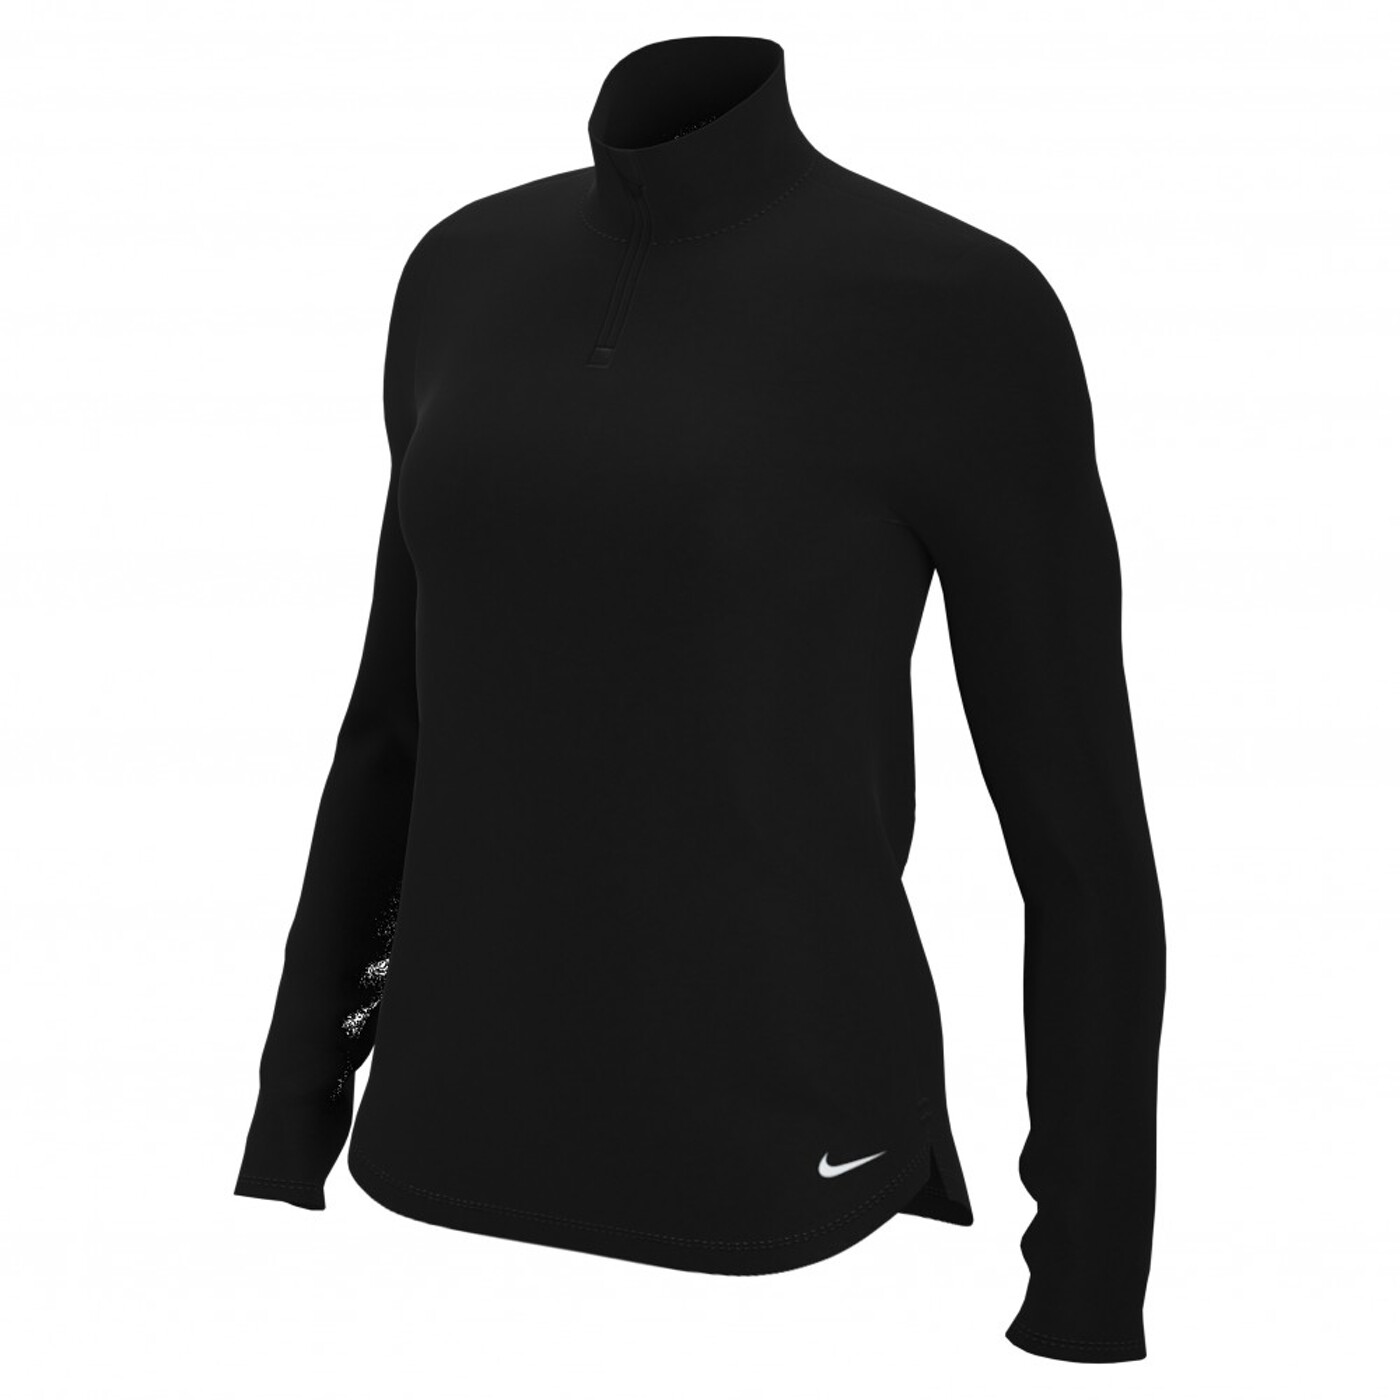 Nike Therma-FIT One Lo - Damen